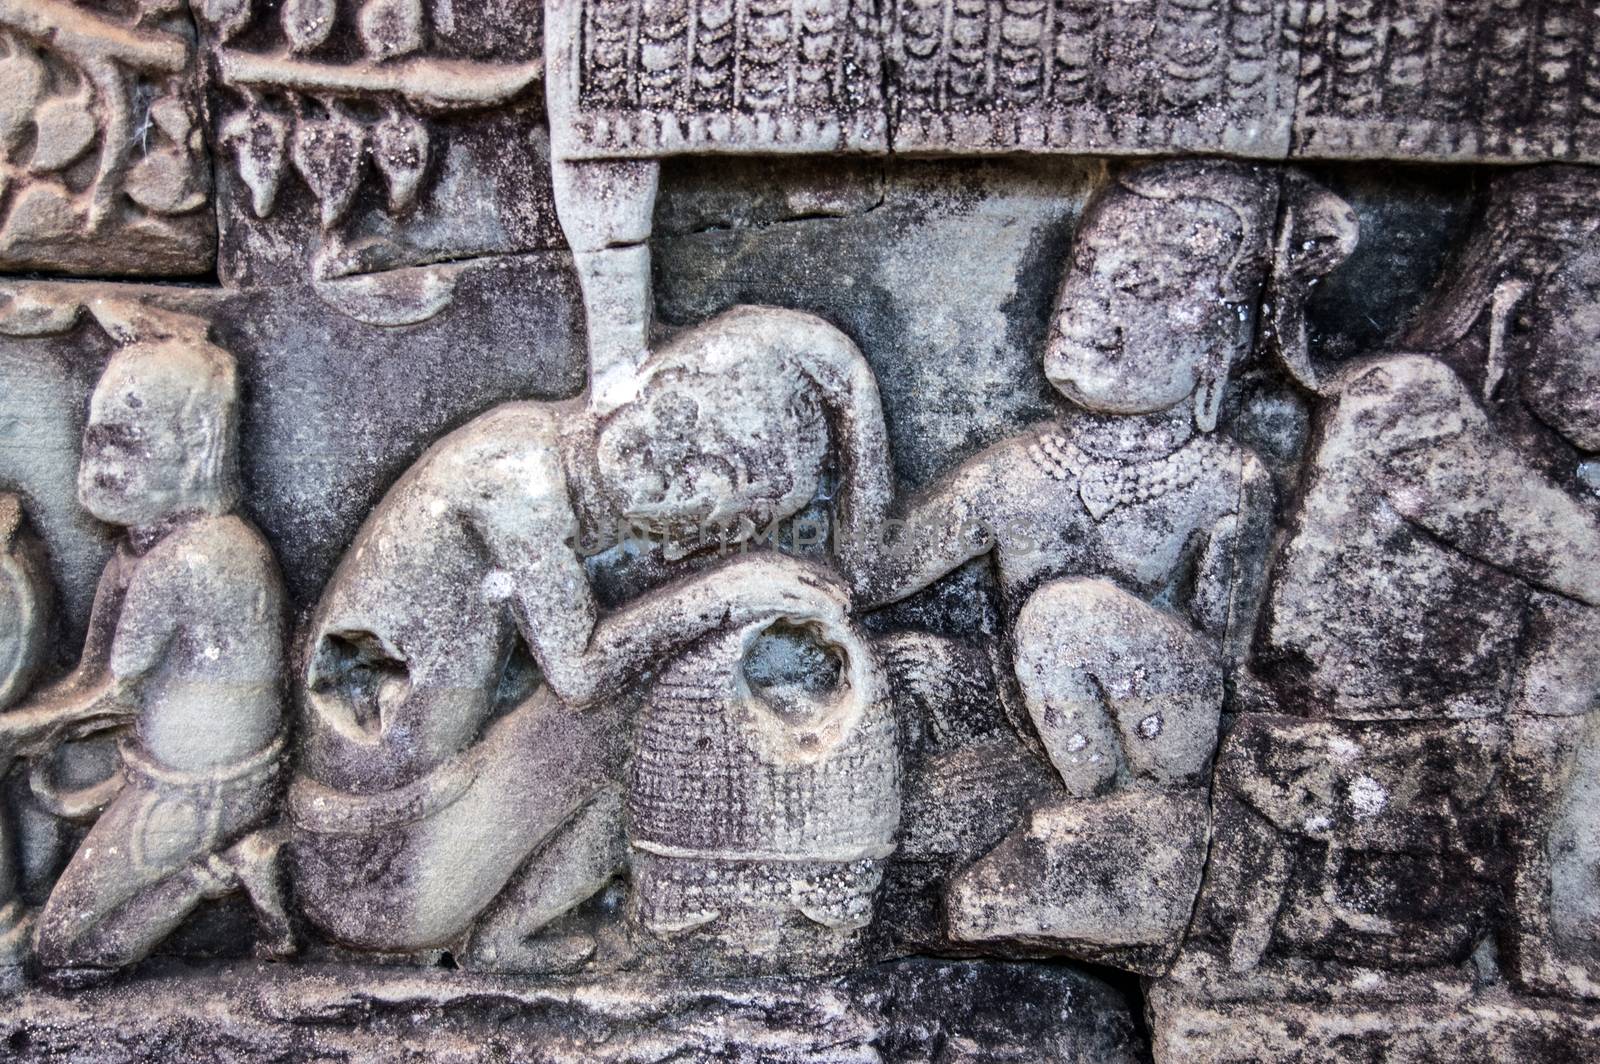 Ancient Khmer carving of lice being picked out of a woman's hair. Wall of Bayon Temple, Angkor Thom, Cambodia.